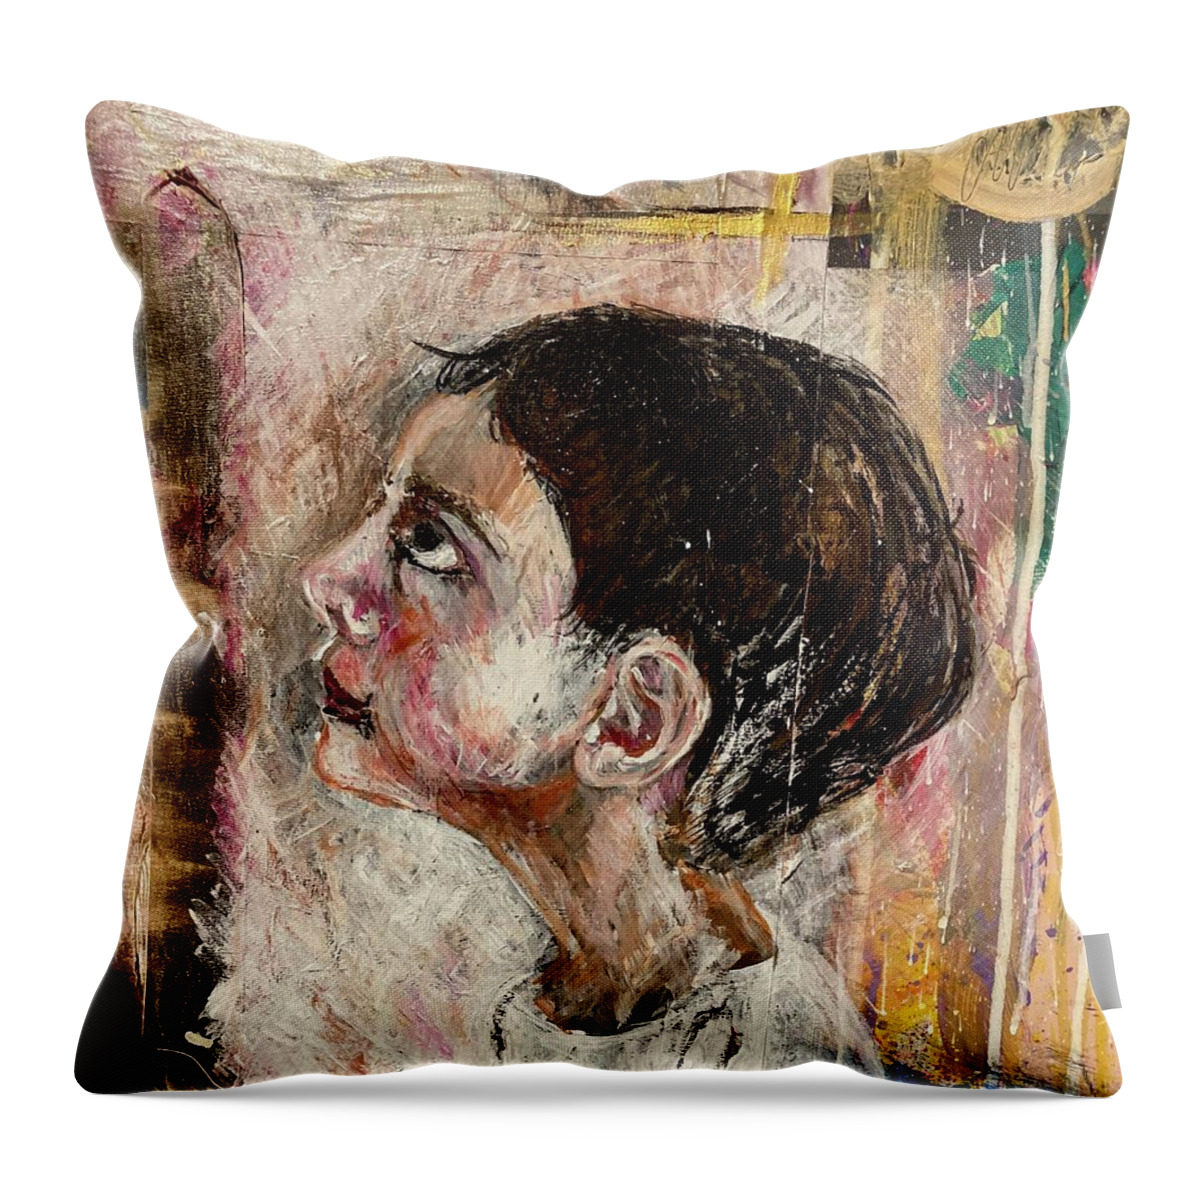 Child Throw Pillow featuring the painting Child looking up by David Euler